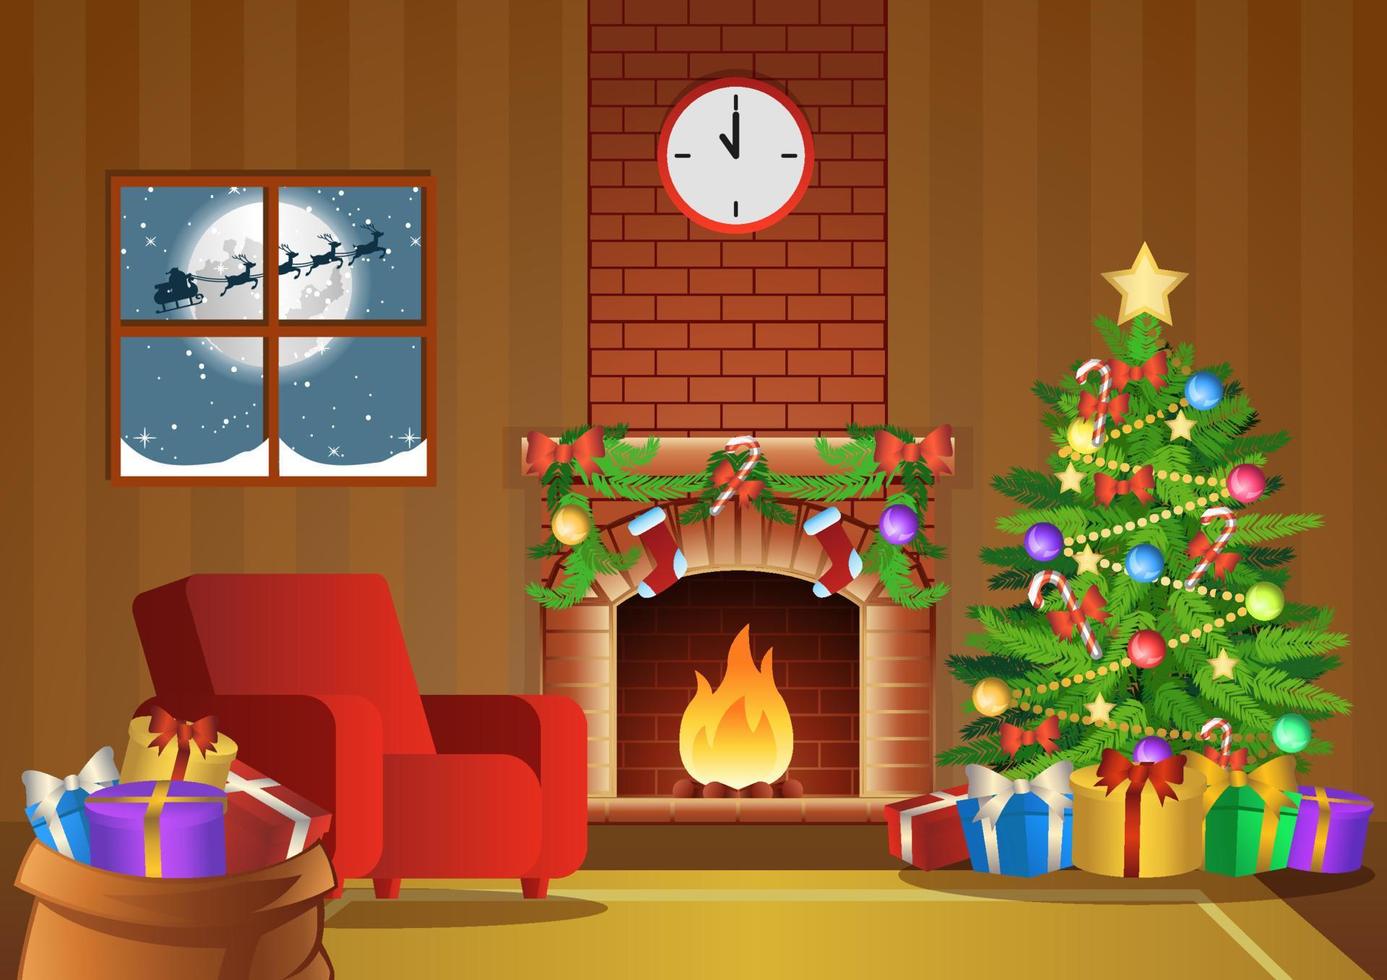 fireplace room decorate for Christmas night vector